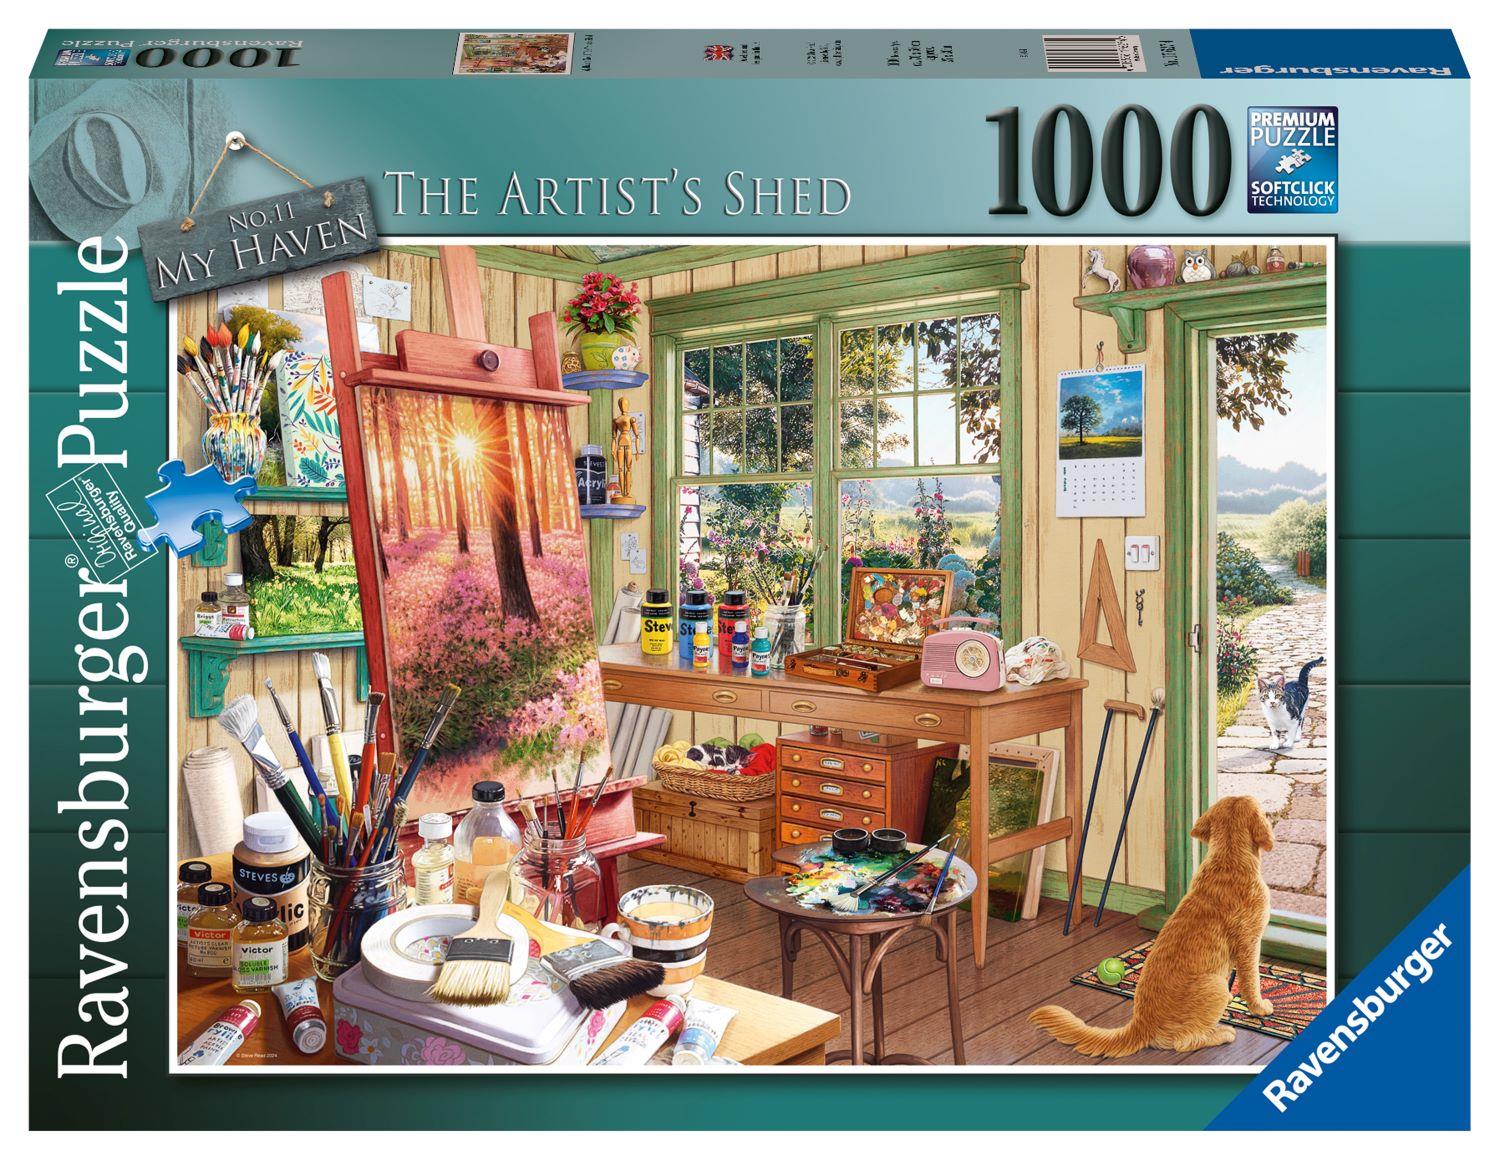 https://www.thepuzzlecollections.com/wp-content/uploads/2024/01/Ravensburger-My-Haven-No.-11-The-Artists-Shed-Puzzle.jpg